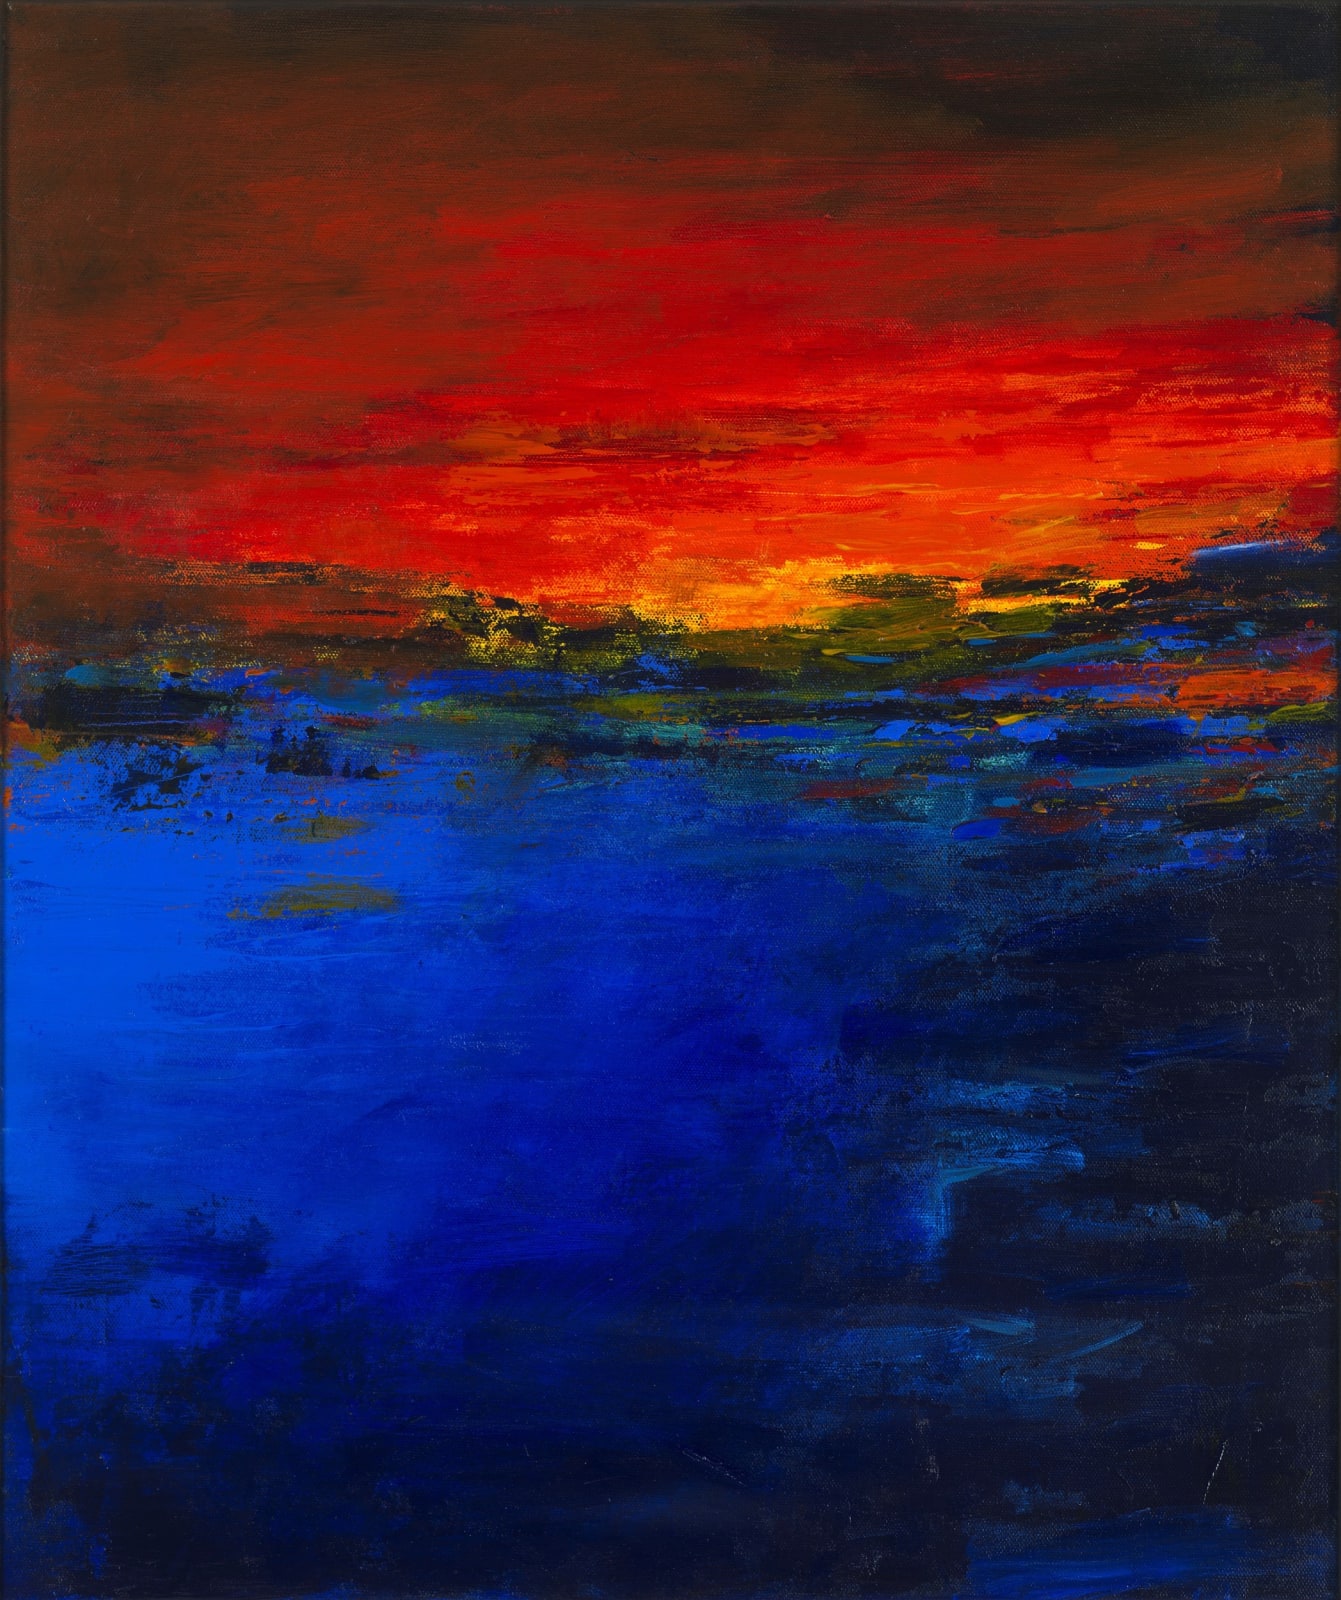 Martyn Brewster, Fading Sunset Study, 2020